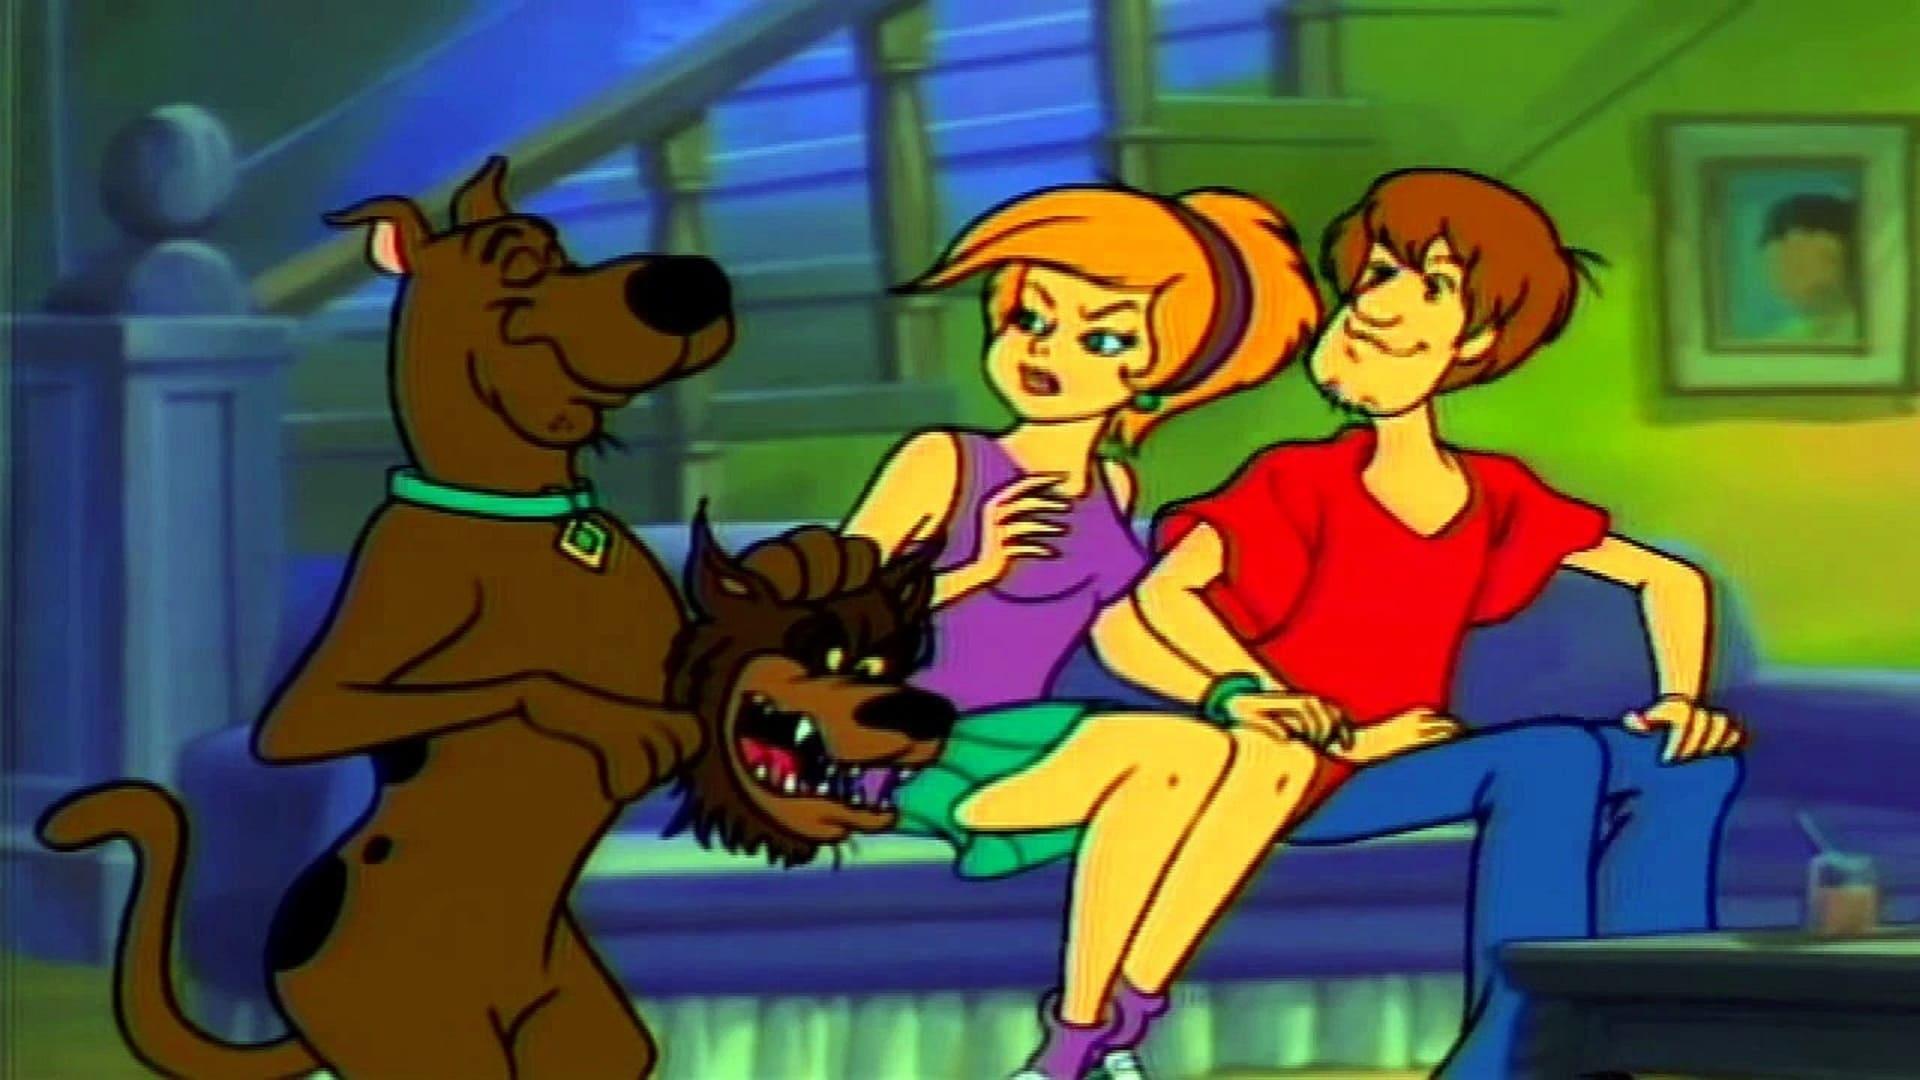 Scooby-Doo! and the Werewolves backdrop